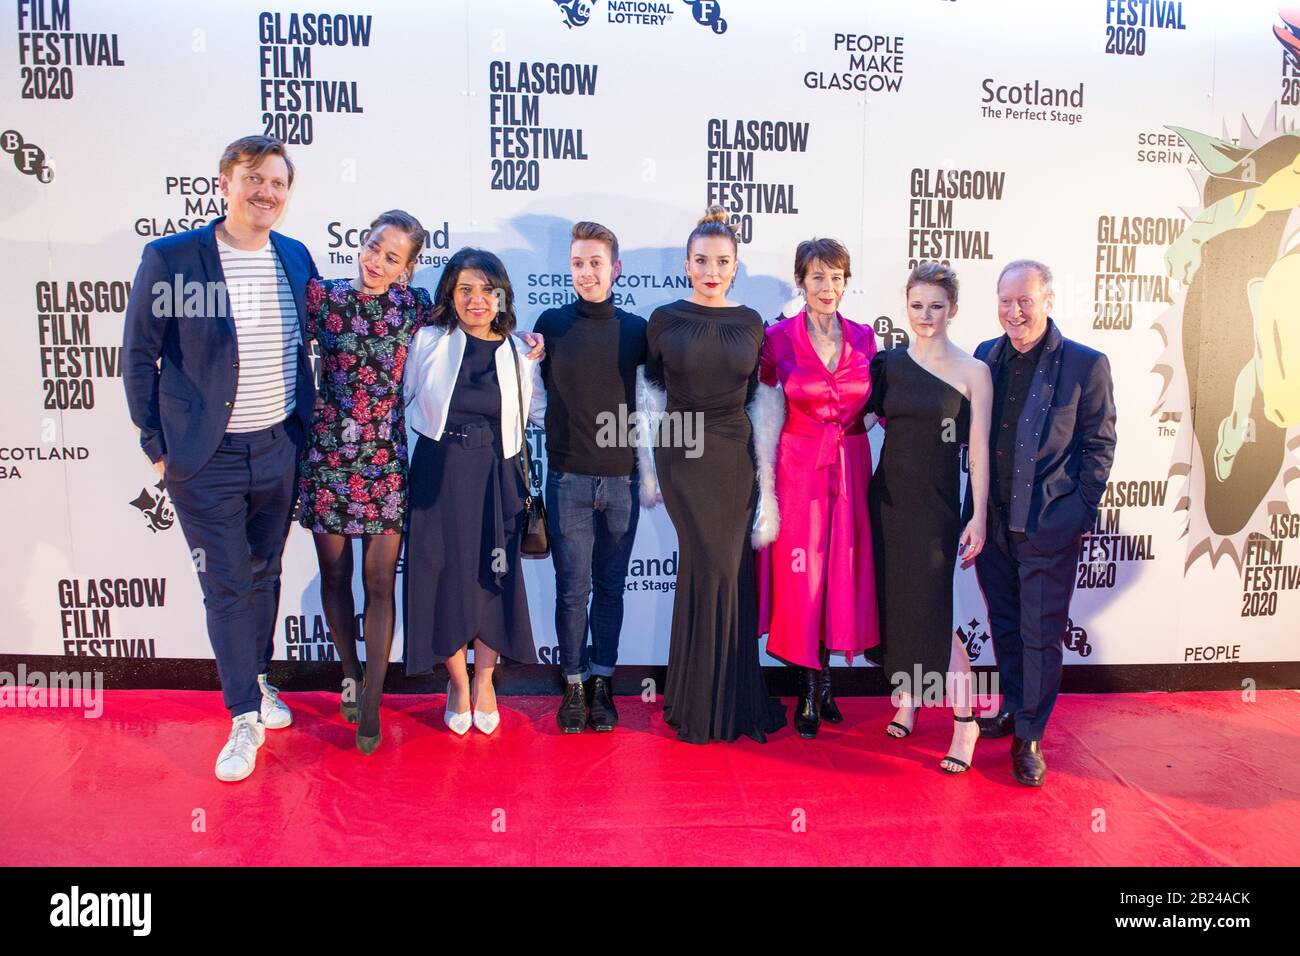 Glasgow, UK. 29th Feb, 2020. Pictured: (L-R) Tonio Kellner; Eliza Schroeder; Rajita Shah; unknown; Candice Brown; Celia Imrie; Shannon Tarbet; Bill Paterson. World Premiere of ‘Love Sarah' `at the Glasgow Film Festival 2020 on thee red carpet outside of the Glasgow Film Theatre. Credit: Colin Fisher/Alamy Live News Stock Photo